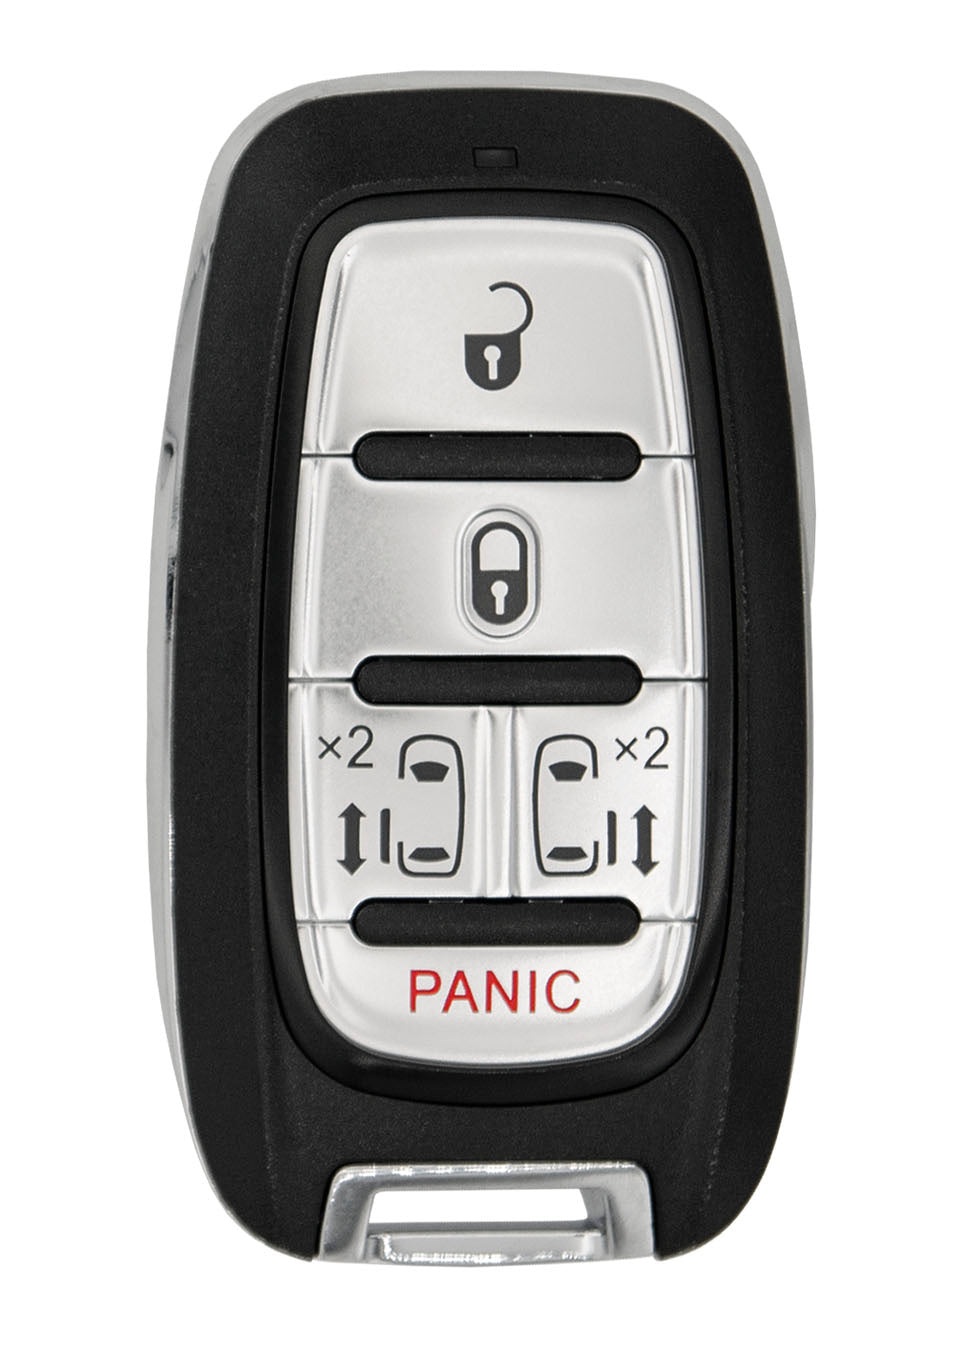 ILCO PRX-CHRY-5B3 - Chrysler 7 Button Prox Remote for 2017-2020 Chrysler Pacifica (FCC: M3N-97395900) 036448255375 / AX00013830